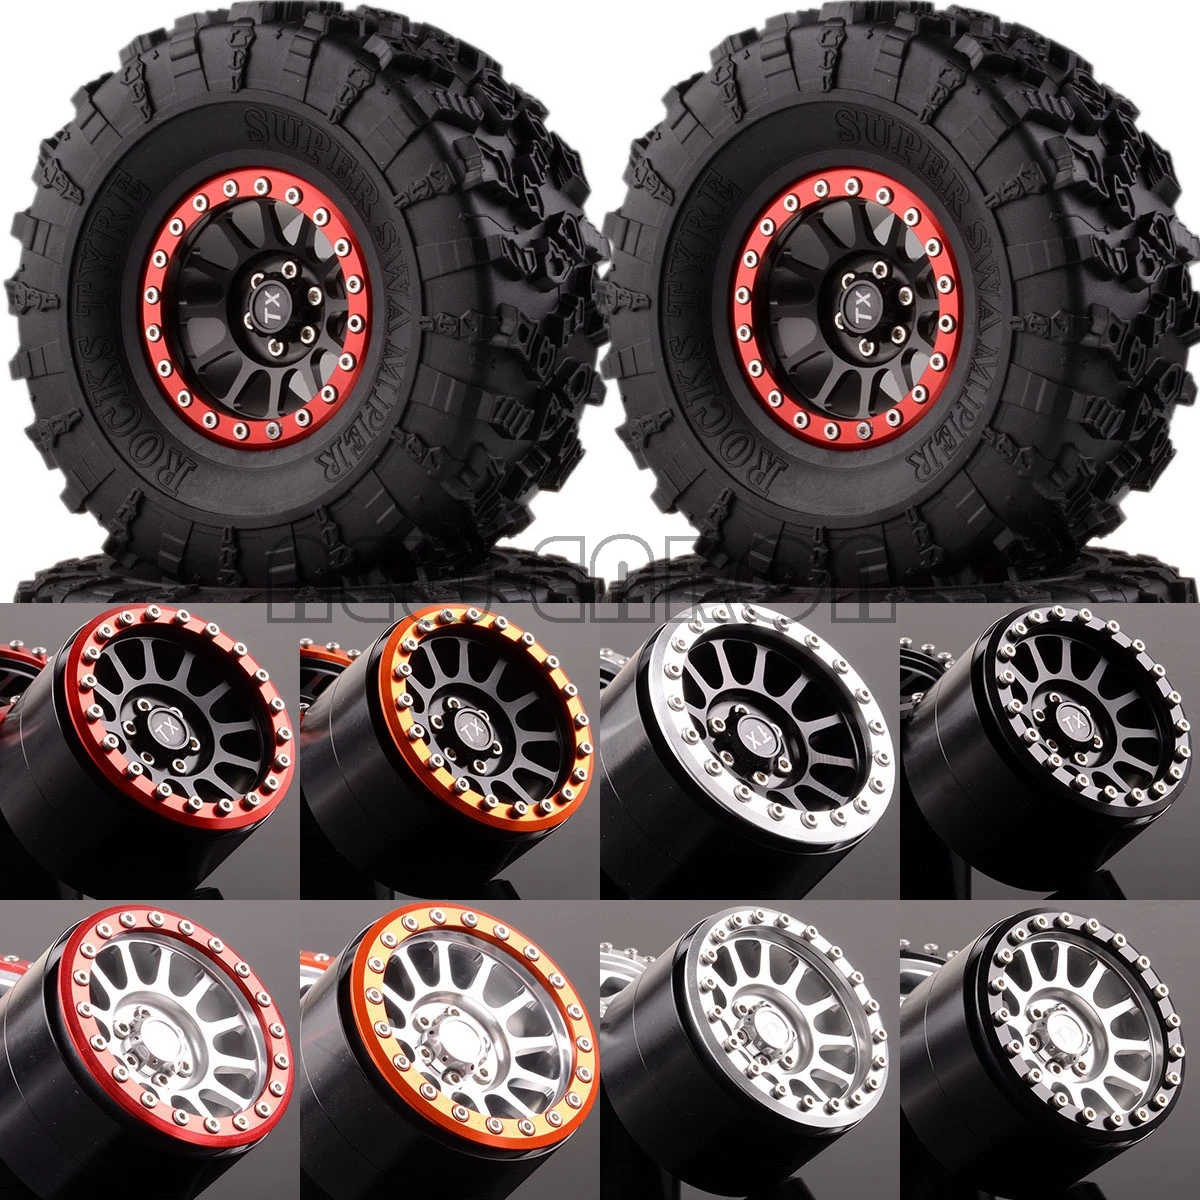 4Pcs 1/10 Scale 2.2 Rubber RC Tires Tyres Durable Set 132mm Rock Crawler Car Off Road Climbing 1.9 Inch Beadlock Wheel Traxxas Axial SCX10 S Pattern 